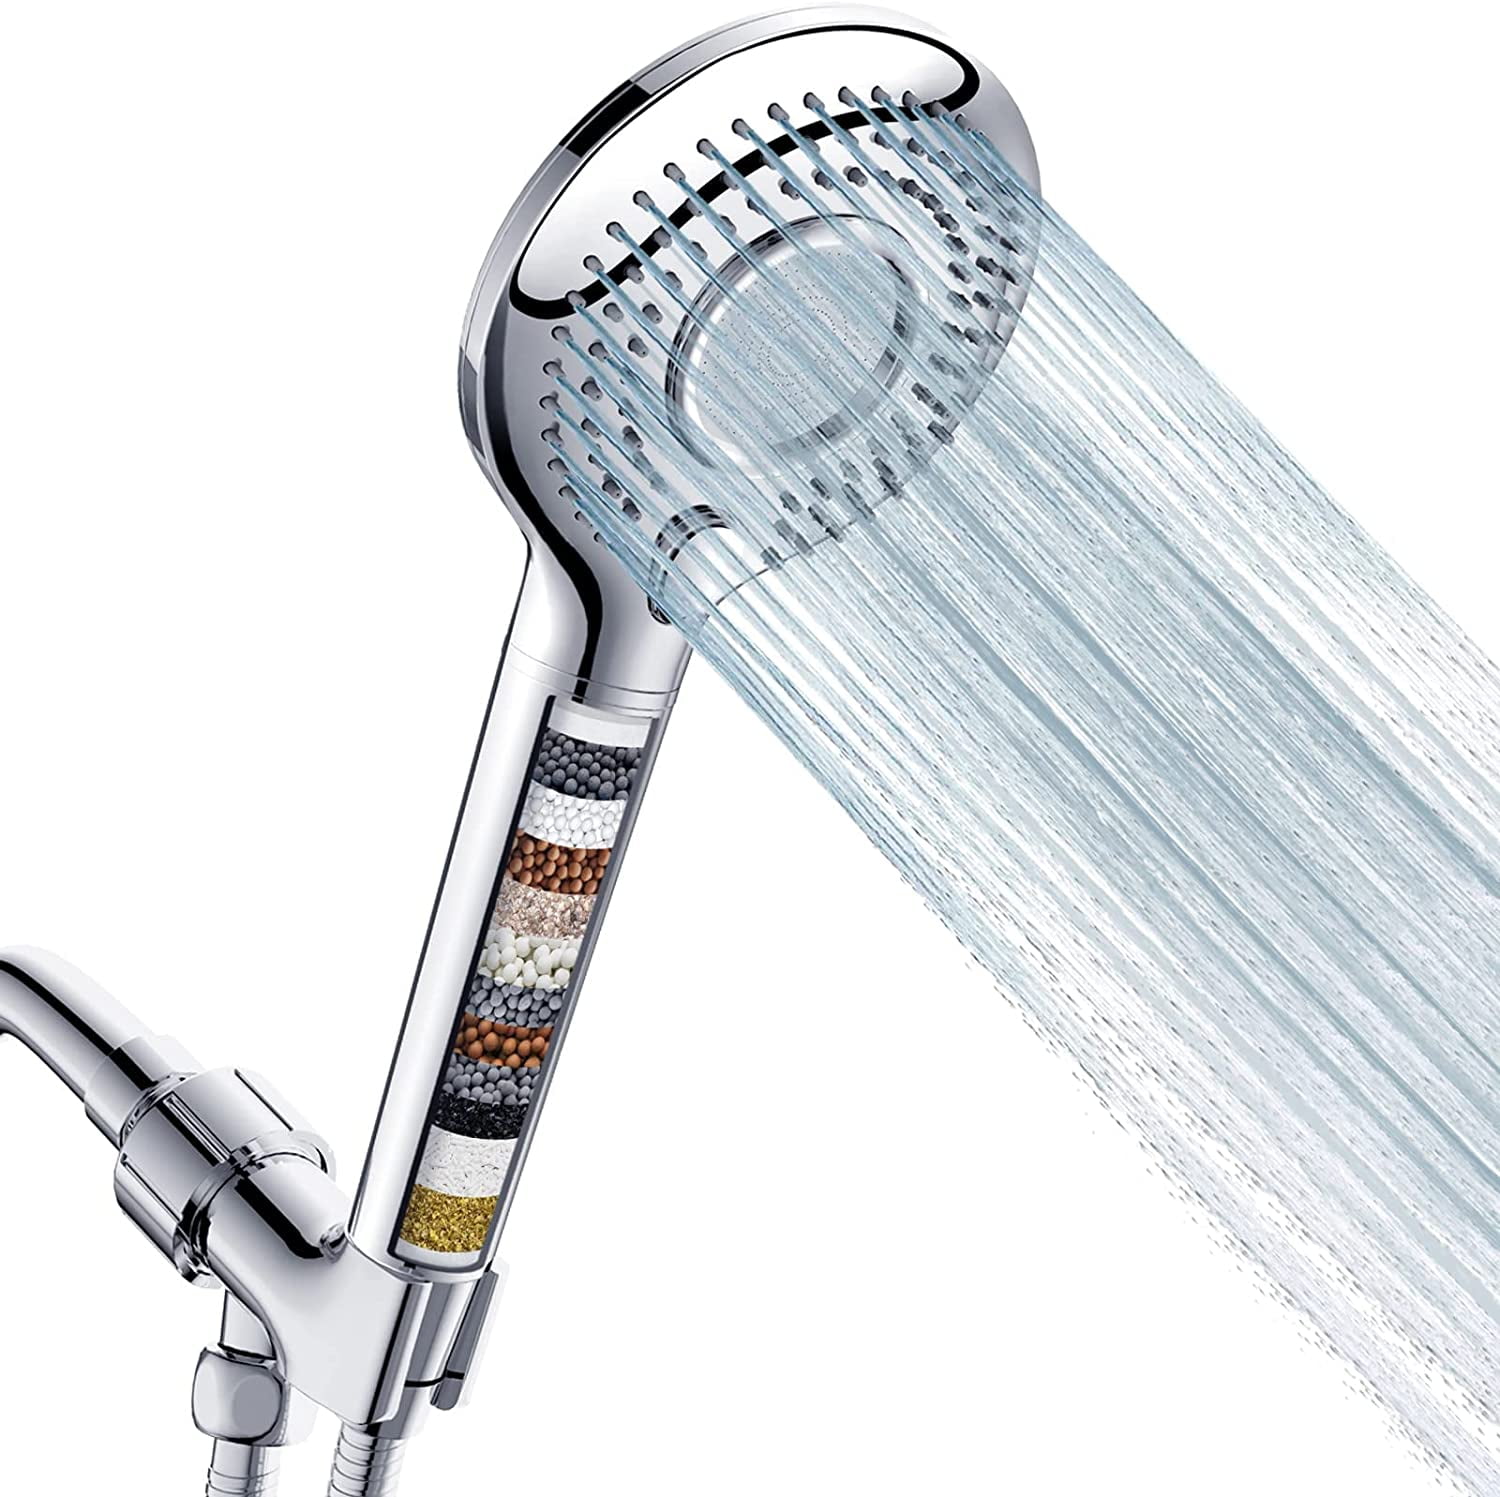 FEELSO Shower Head and 15 Stage Shower Filter Combo, High Pressure 5 Spray  Settings Filtered Showerhead with Water Softener Filter Cartridge for Hard